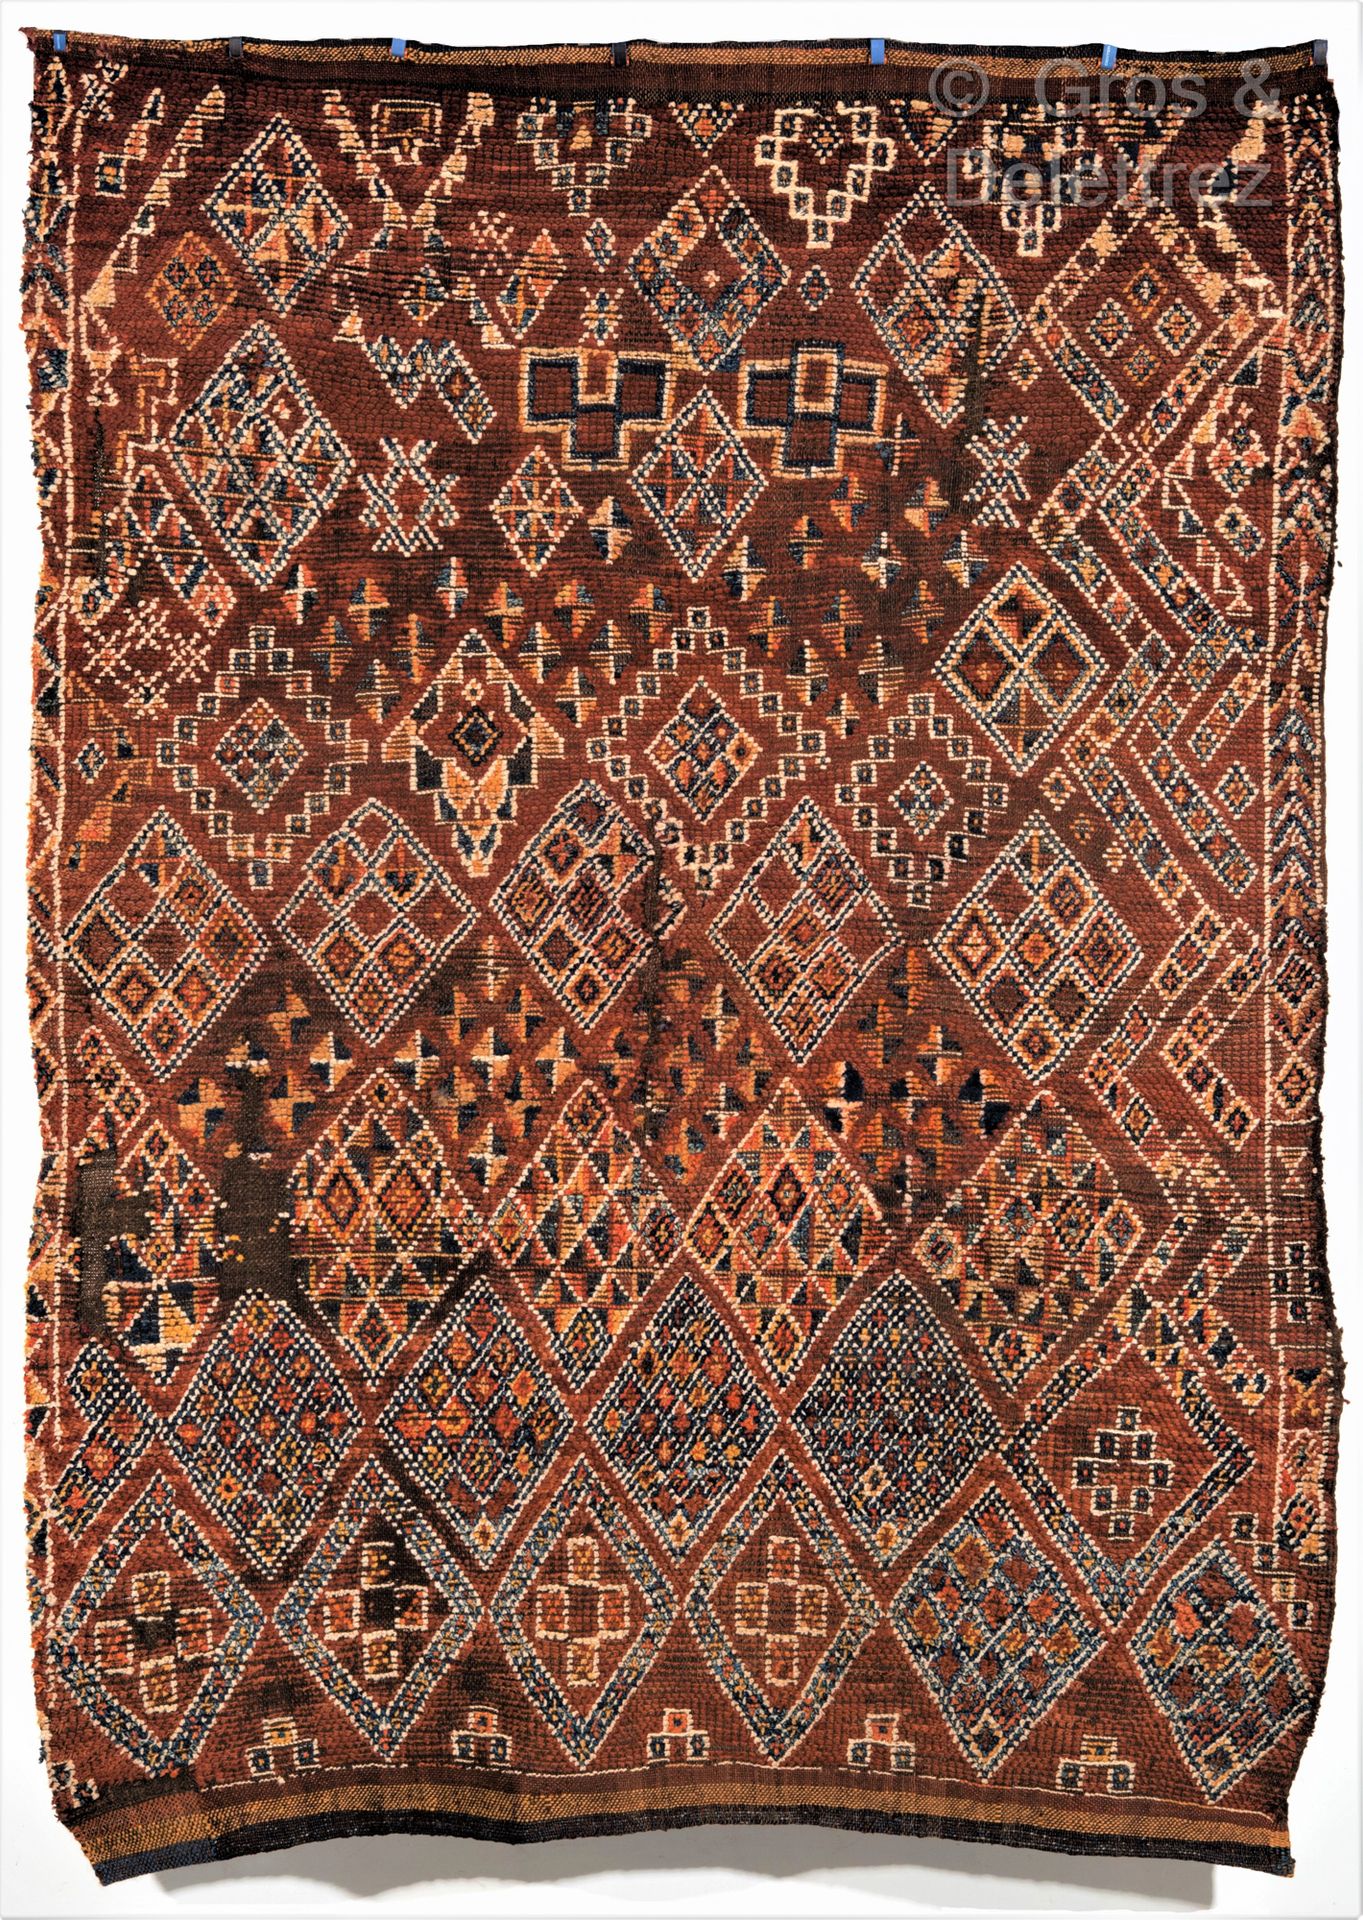 Null An important and very old carpet from Eastern Morocco, Morocco.

An importa&hellip;